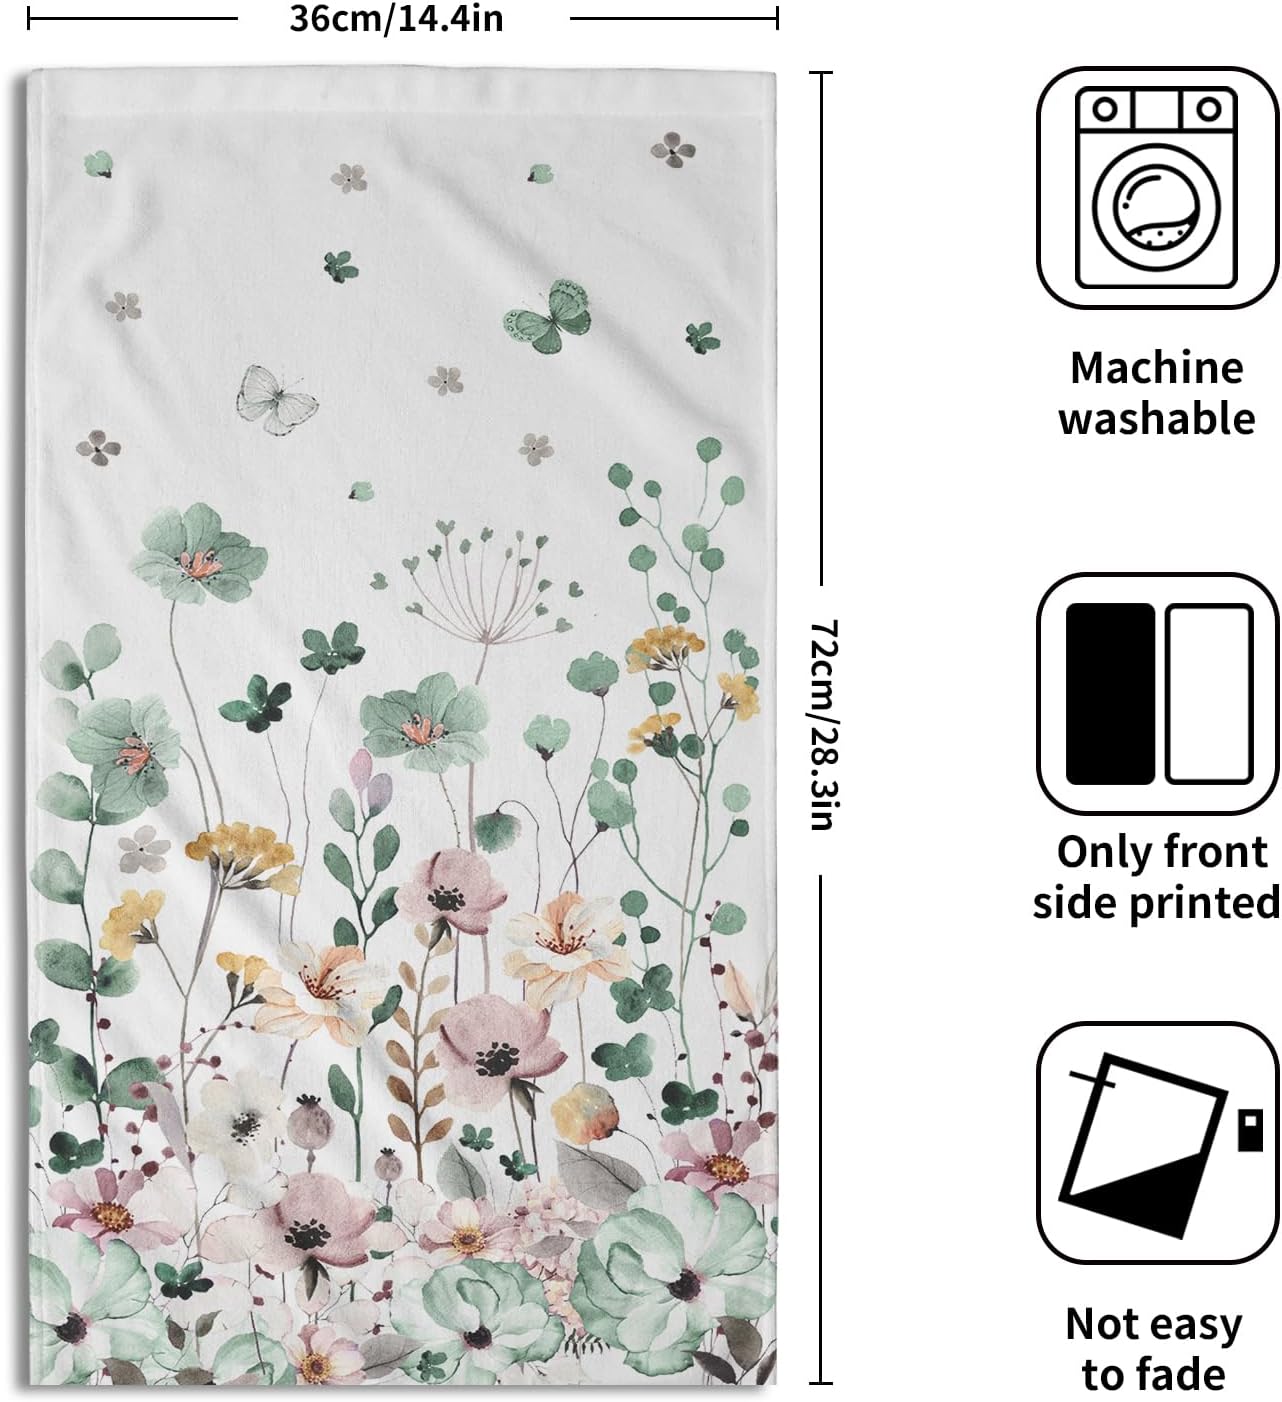 MiaoSi Watercolor Wildflower Hand Towel Set of 2, Spring Floral Botanical Plant Leaves Pink Green White Decorative Soft Highly Absorbent Bath Face Towels for Home Hotel Gym Spa Bathroom